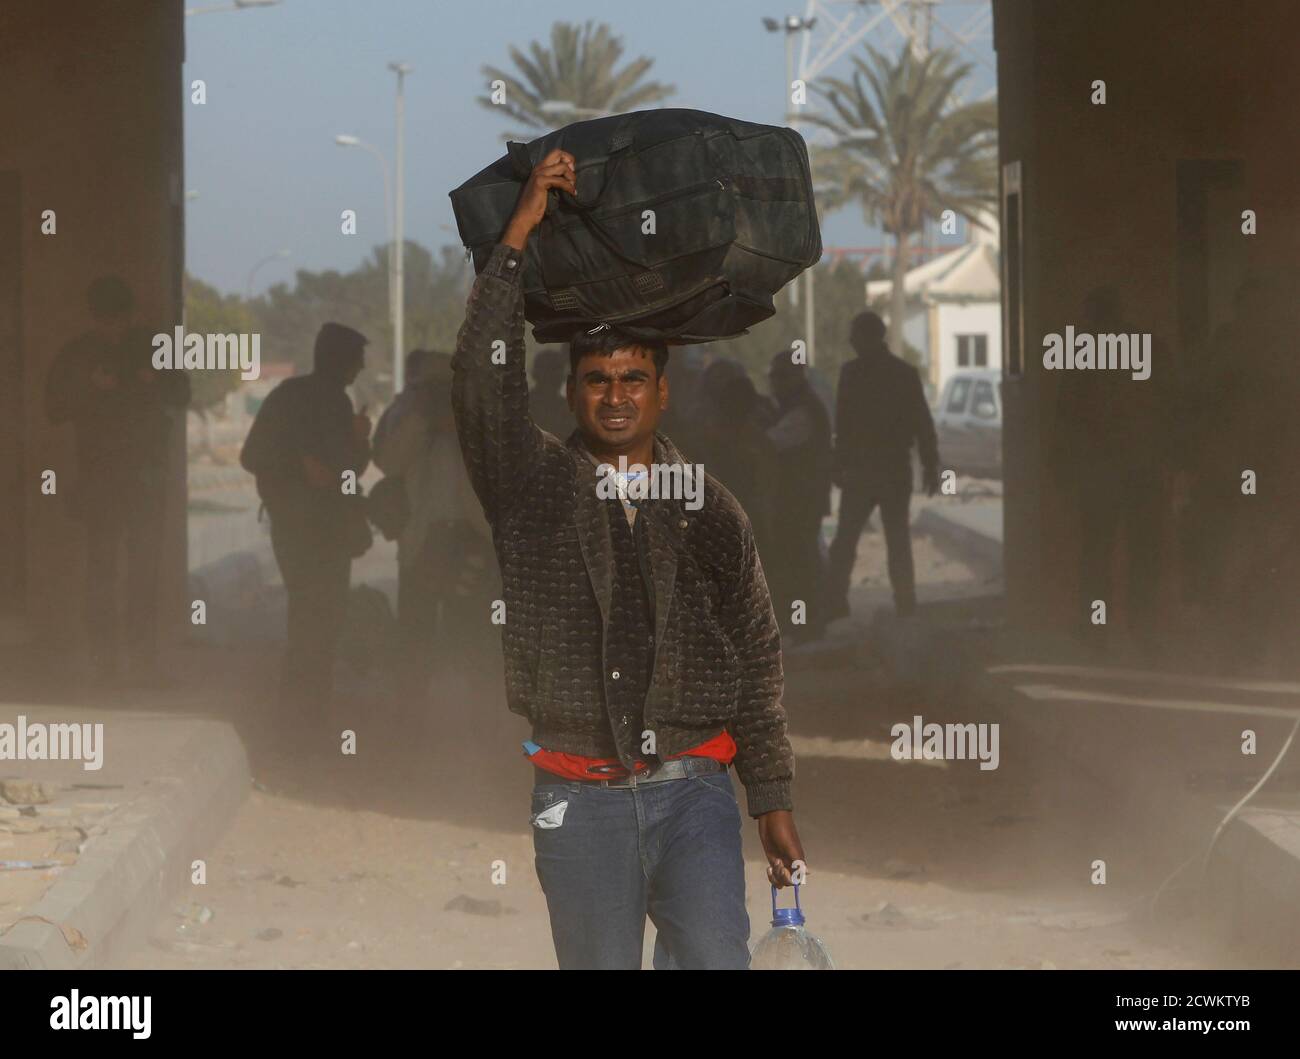 EDITOR'S NOTE: PICTURE TAKEN ON GUIDED GOVERNMENT TOUR  A foreign worker crosses the frontier to Tunisia, at a border point in Ras Judeir, Libya March 3, 2011. REUTERS/Ahmed Jadallah       (LIBYA - Tags: POLITICS CIVIL UNREST) Stock Photo